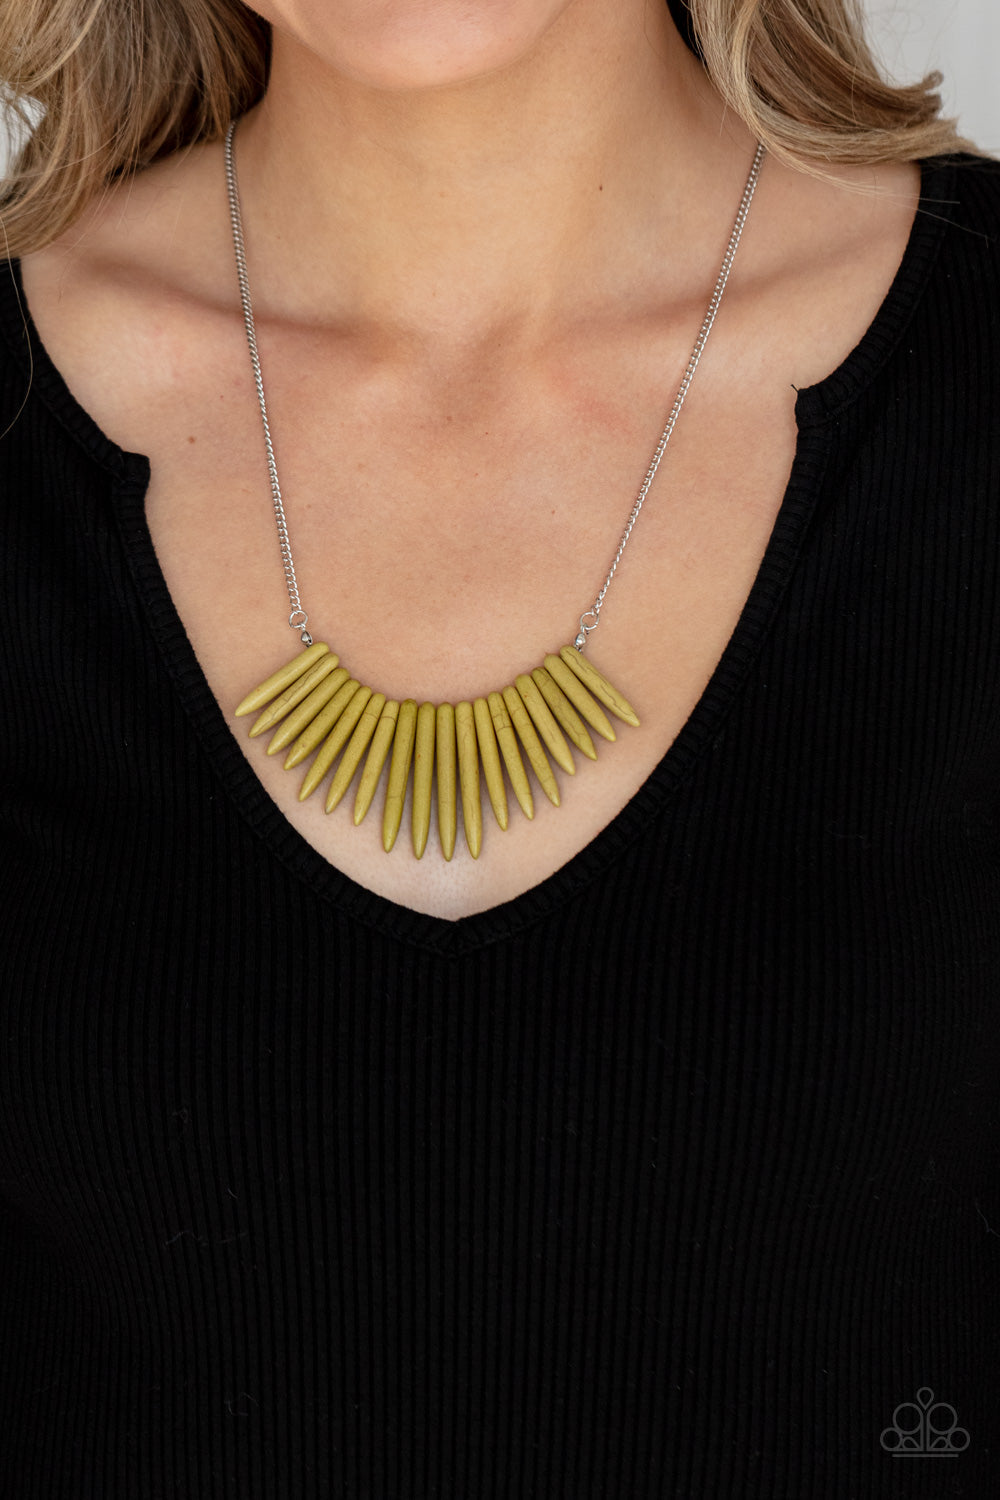 PRE-ORDER - Paparazzi Exotic Edge - Green - Necklace & Earrings - $5 Jewelry with Ashley Swint